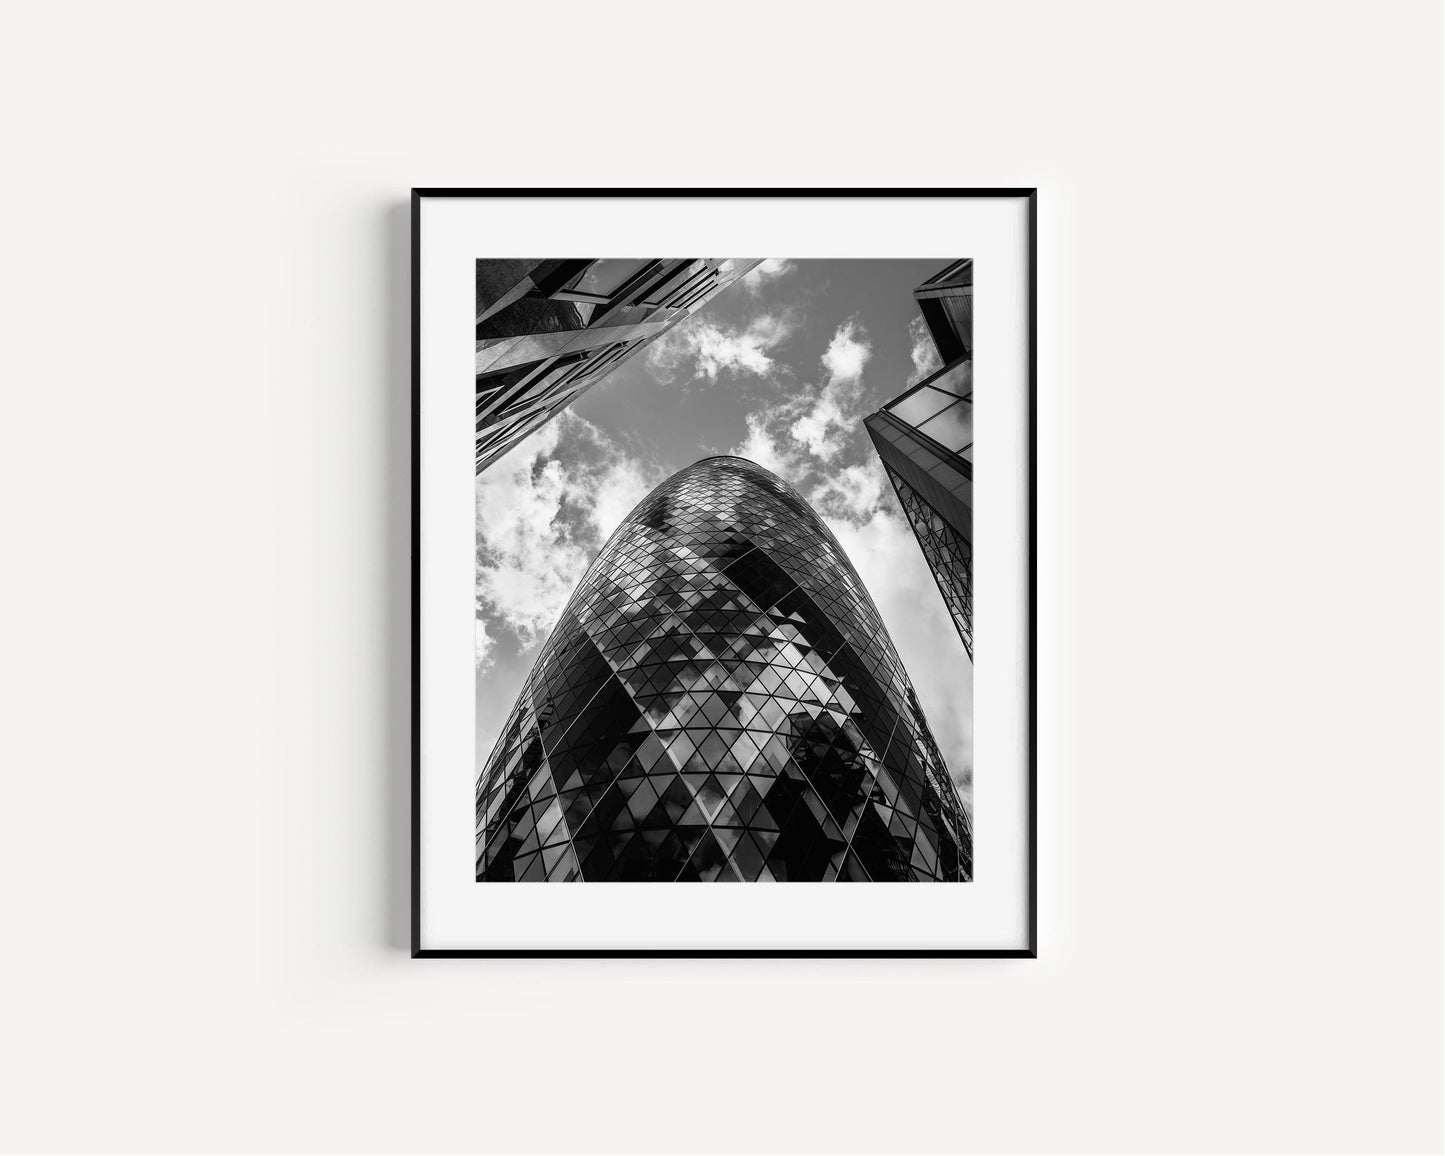 Black and White Gherkin Building Photography Print | London Photography Print - Departures Print Shop